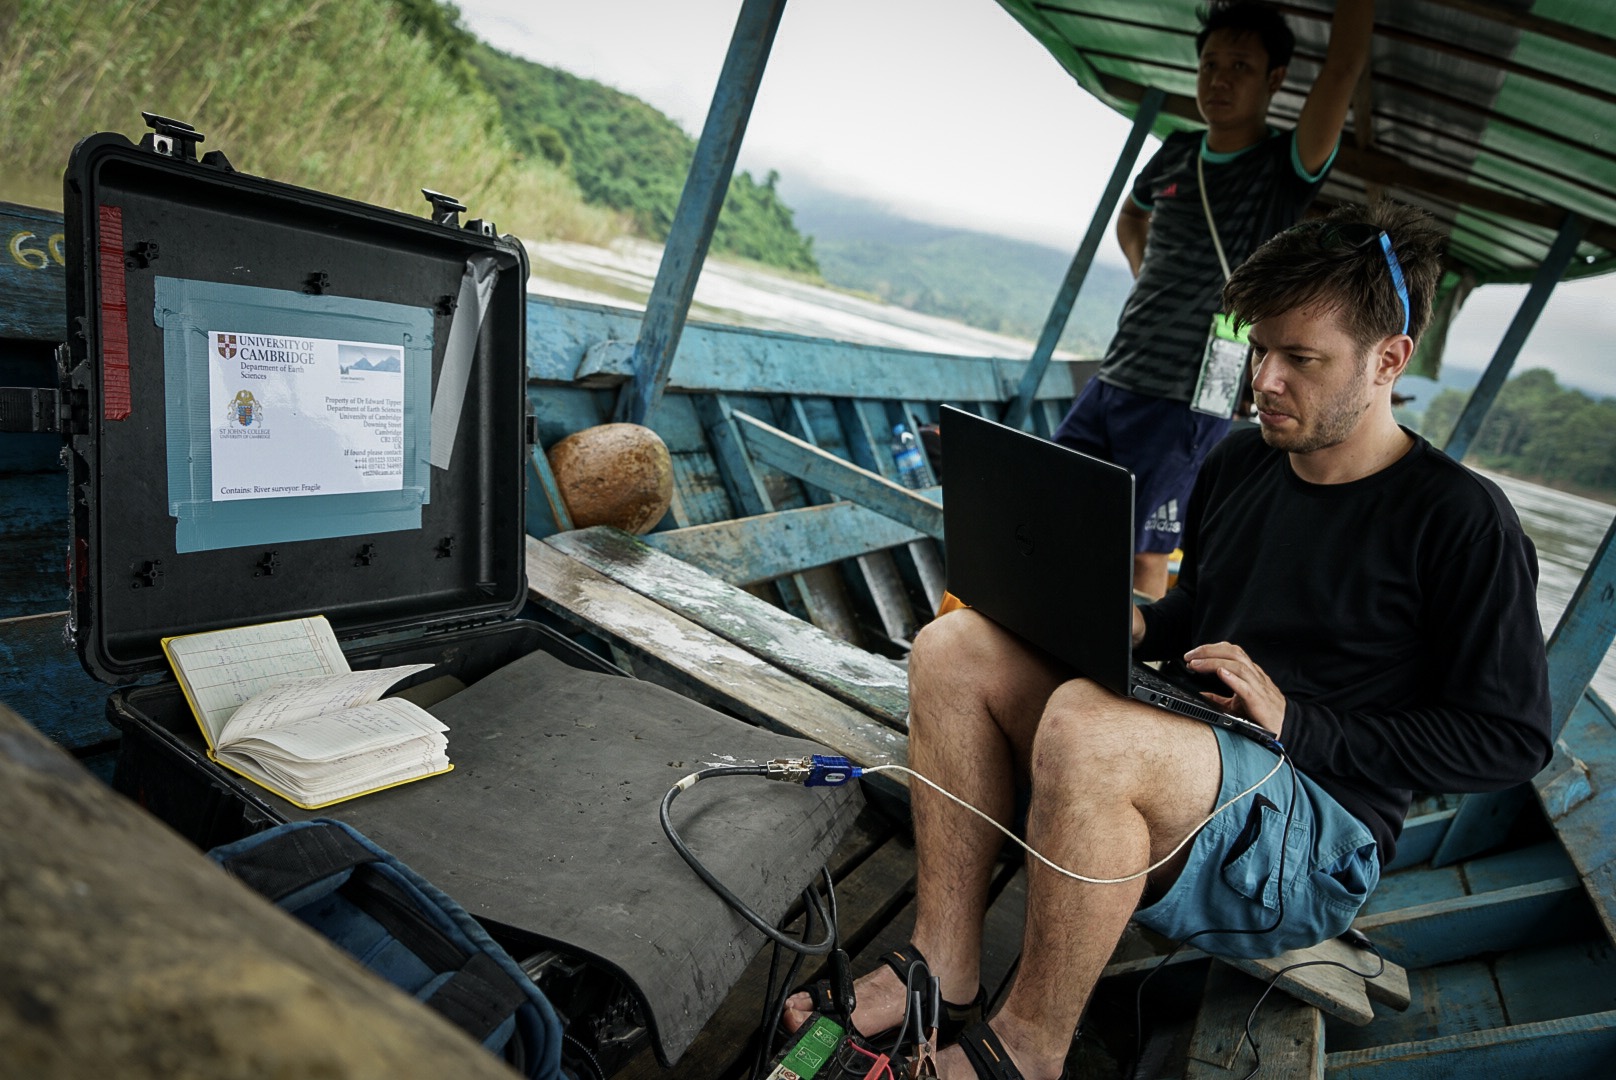 Image of Jotis measuring the flow of the Irrawaddy River